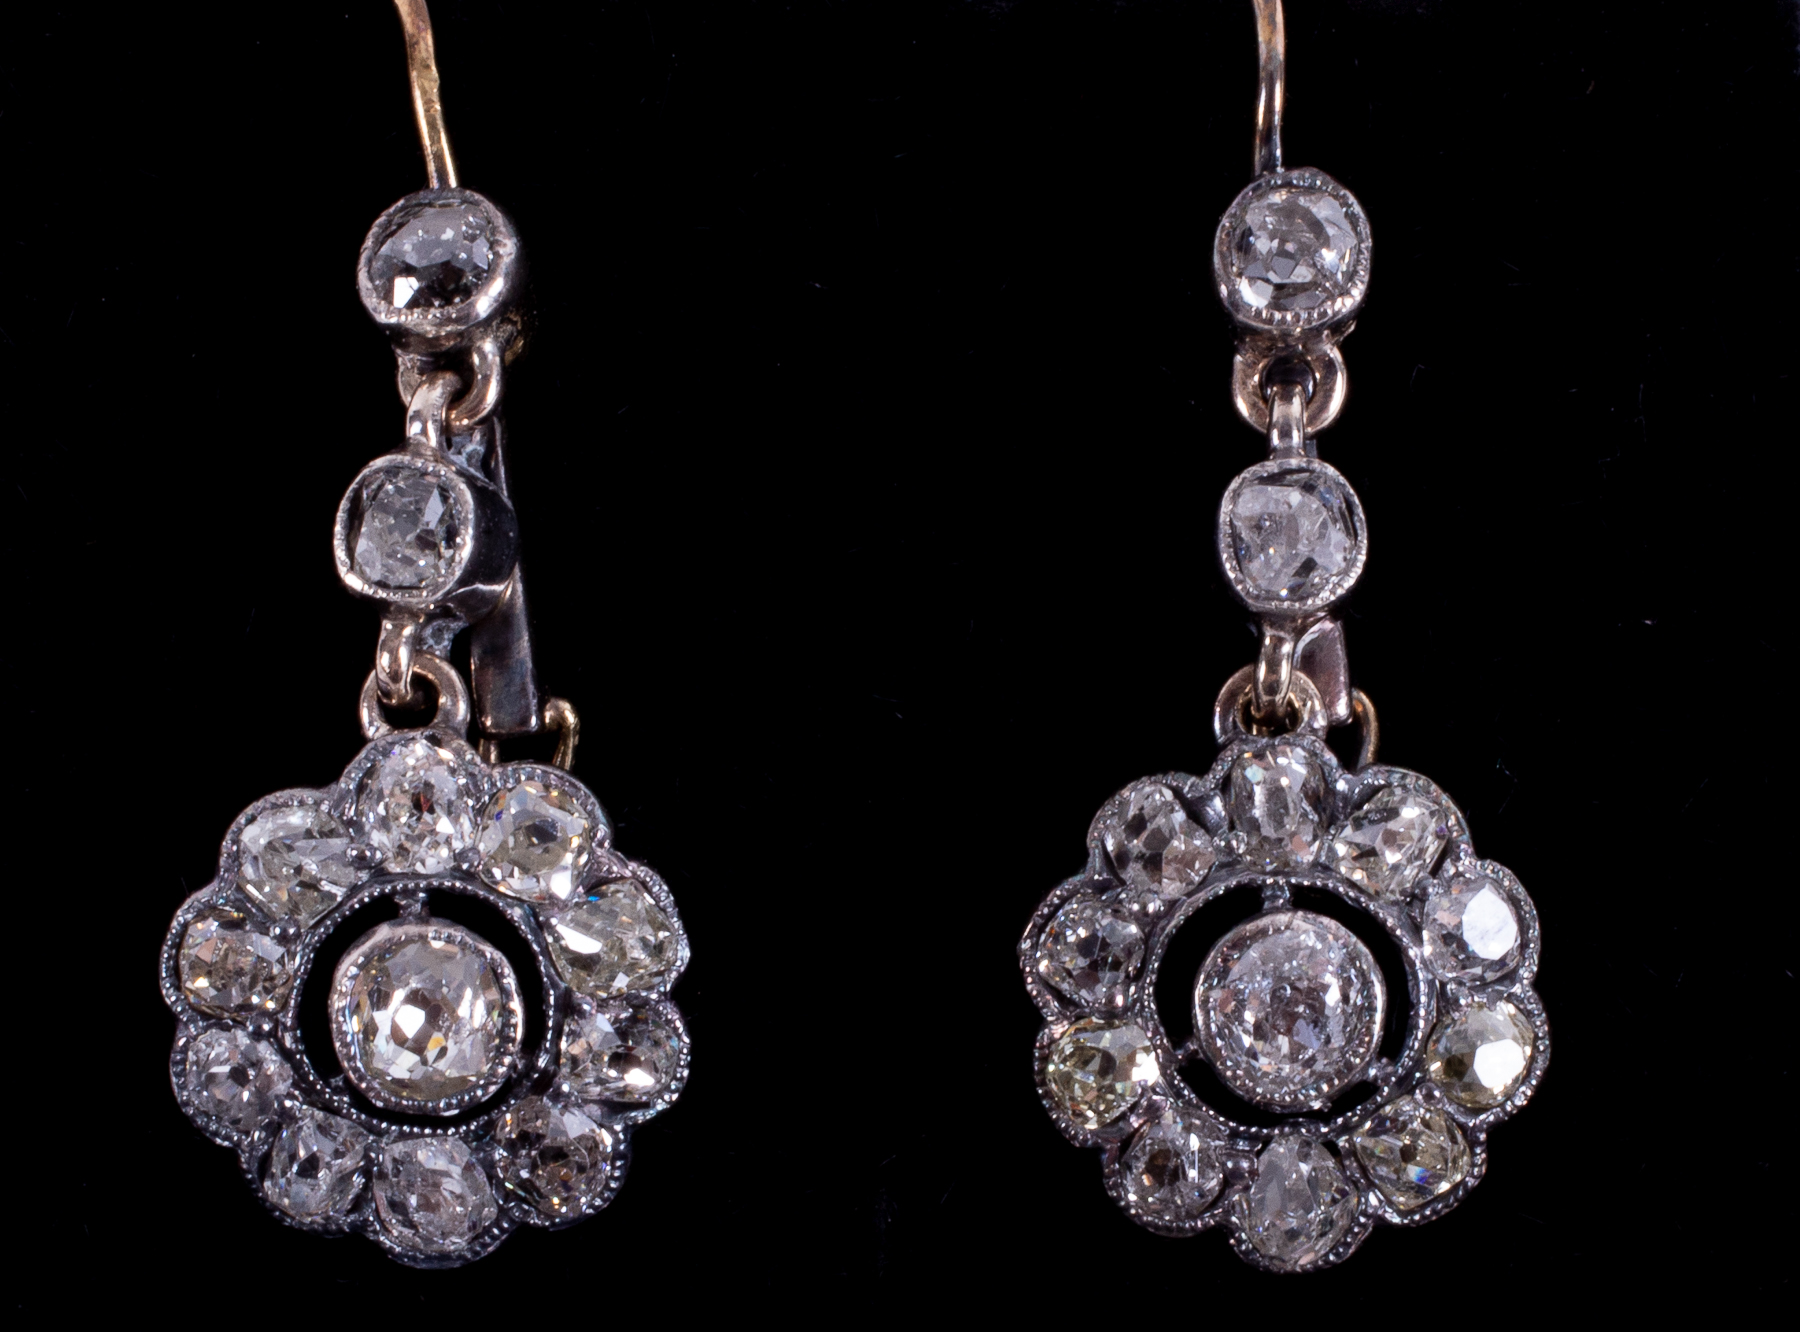 A pair of Edwardian antique yellow gold & platinum (not hallmarked or tested) flower